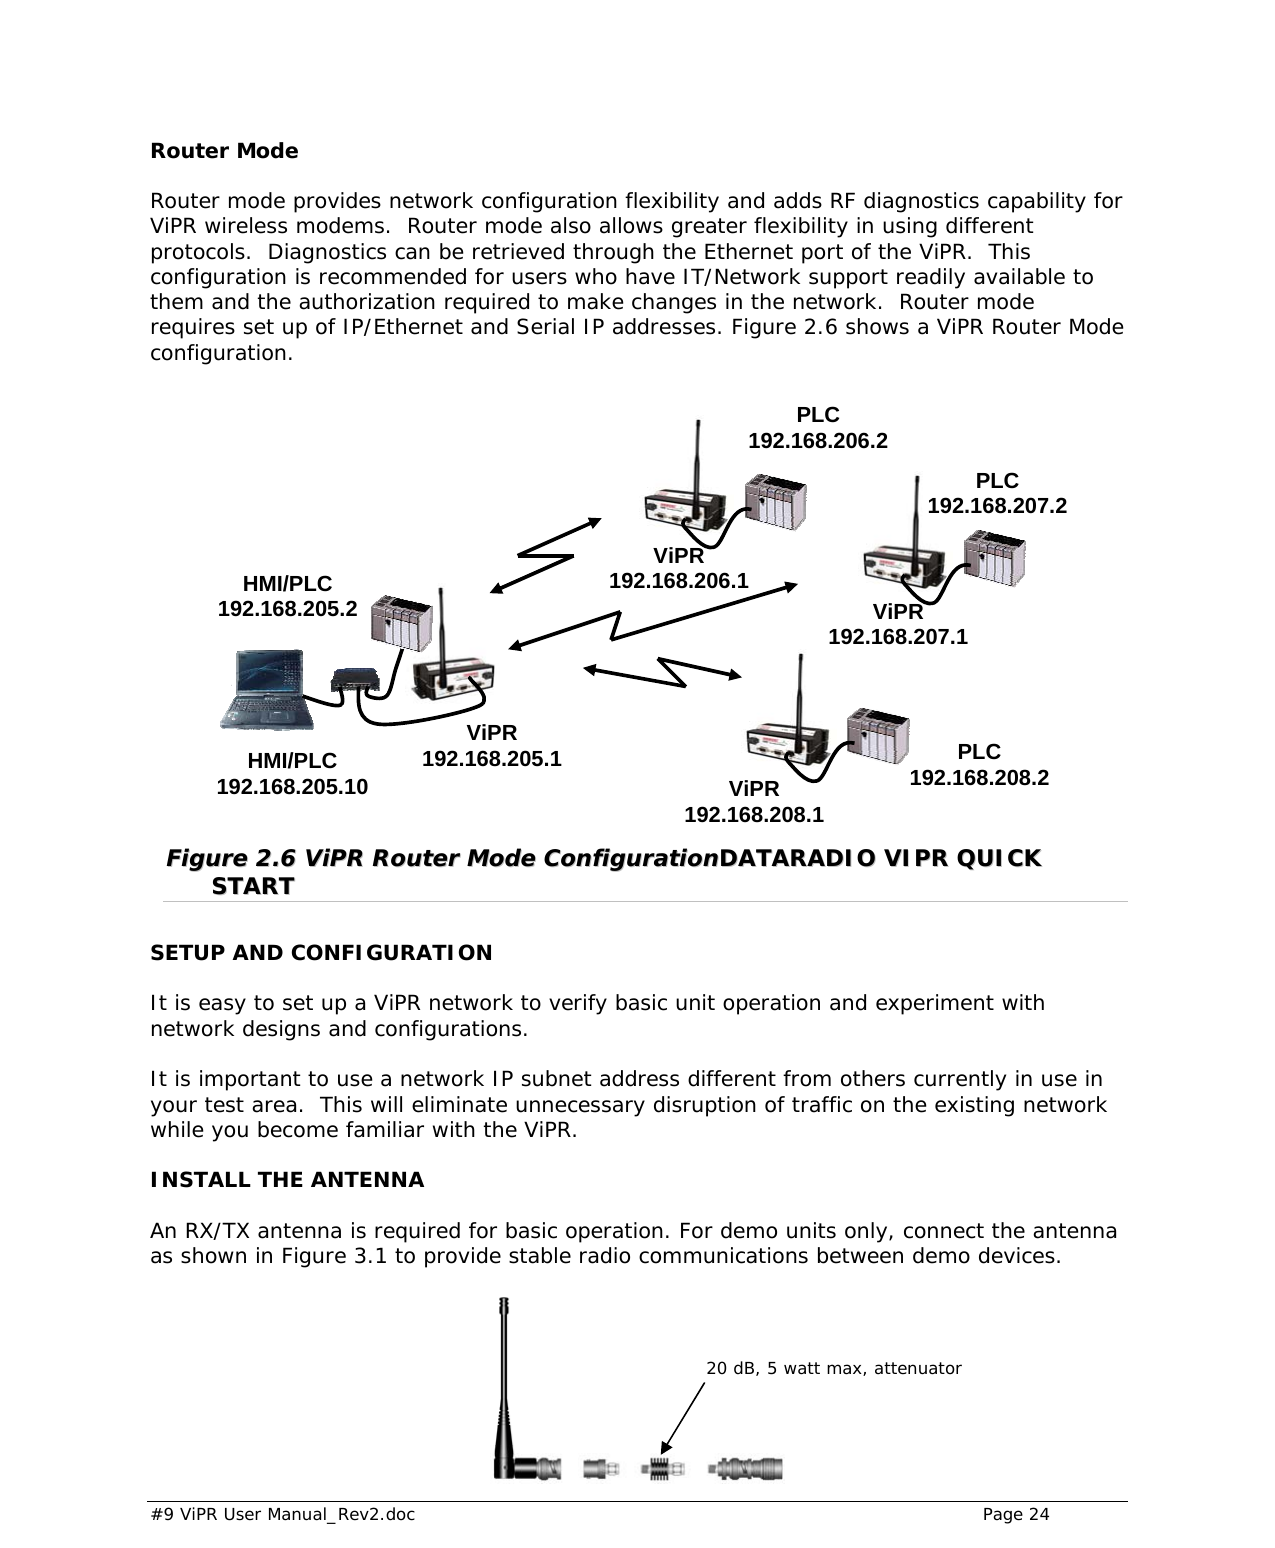  #9 ViPR User Manual_Rev2.doc    Page 24   Router Mode Router mode provides network configuration flexibility and adds RF diagnostics capability for ViPR wireless modems.  Router mode also allows greater flexibility in using different protocols.  Diagnostics can be retrieved through the Ethernet port of the ViPR.  This configuration is recommended for users who have IT/Network support readily available to them and the authorization required to make changes in the network.  Router mode requires set up of IP/Ethernet and Serial IP addresses. Figure 2.6 shows a ViPR Router Mode configuration.                    FFiigguurree  22..66  VViiPPRR  RRoouutteerr  MMooddee  CCoonnffiigguurraattiioonnDDAATTAARRAADDIIOO  VVIIPPRR  QQUUIICCKK  SSTTAARRTT  SETUP AND CONFIGURATION It is easy to set up a ViPR network to verify basic unit operation and experiment with network designs and configurations.   It is important to use a network IP subnet address different from others currently in use in your test area.  This will eliminate unnecessary disruption of traffic on the existing network while you become familiar with the ViPR.  INSTALL THE ANTENNA An RX/TX antenna is required for basic operation. For demo units only, connect the antenna as shown in Figure 3.1 to provide stable radio communications between demo devices.    ViPR 192.168.205.1 ViPR 192.168.206.1 PLC 192.168.206.2 ViPR 192.168.207.1 PLC 192.168.207.2 ViPR 192.168.208.1 PLC 192.168.208.2 HMI/PLC 192.168.205.2 HMI/PLC 192.168.205.10 20 dB, 5 watt max, attenuator 